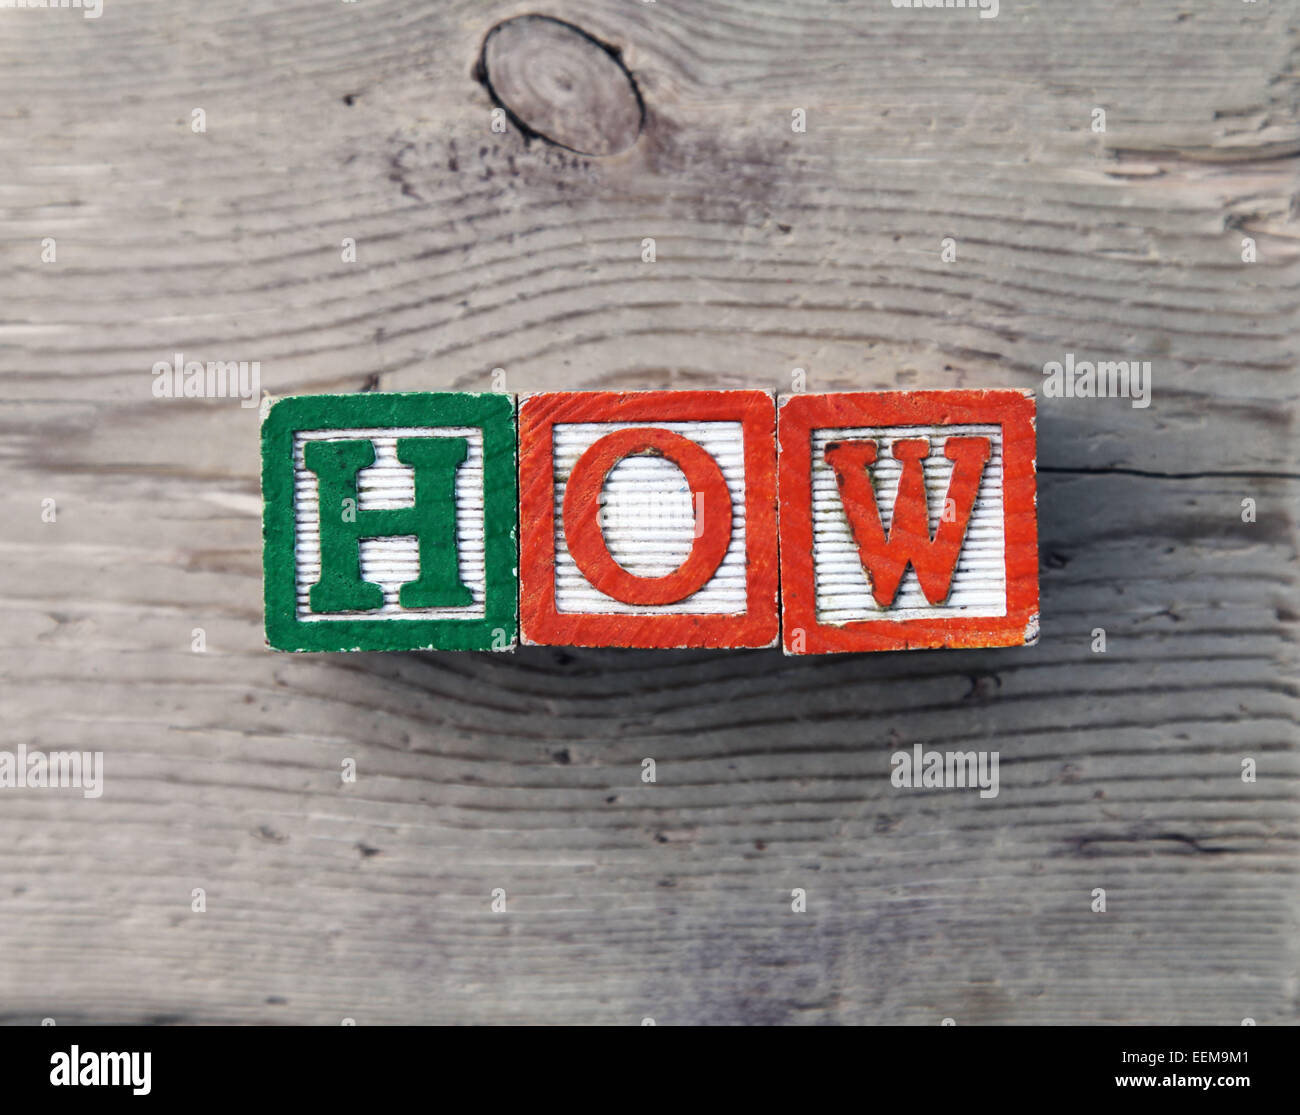 It's a photo top view of wood blocks or wood cubes combined together to create the word Stock Photo